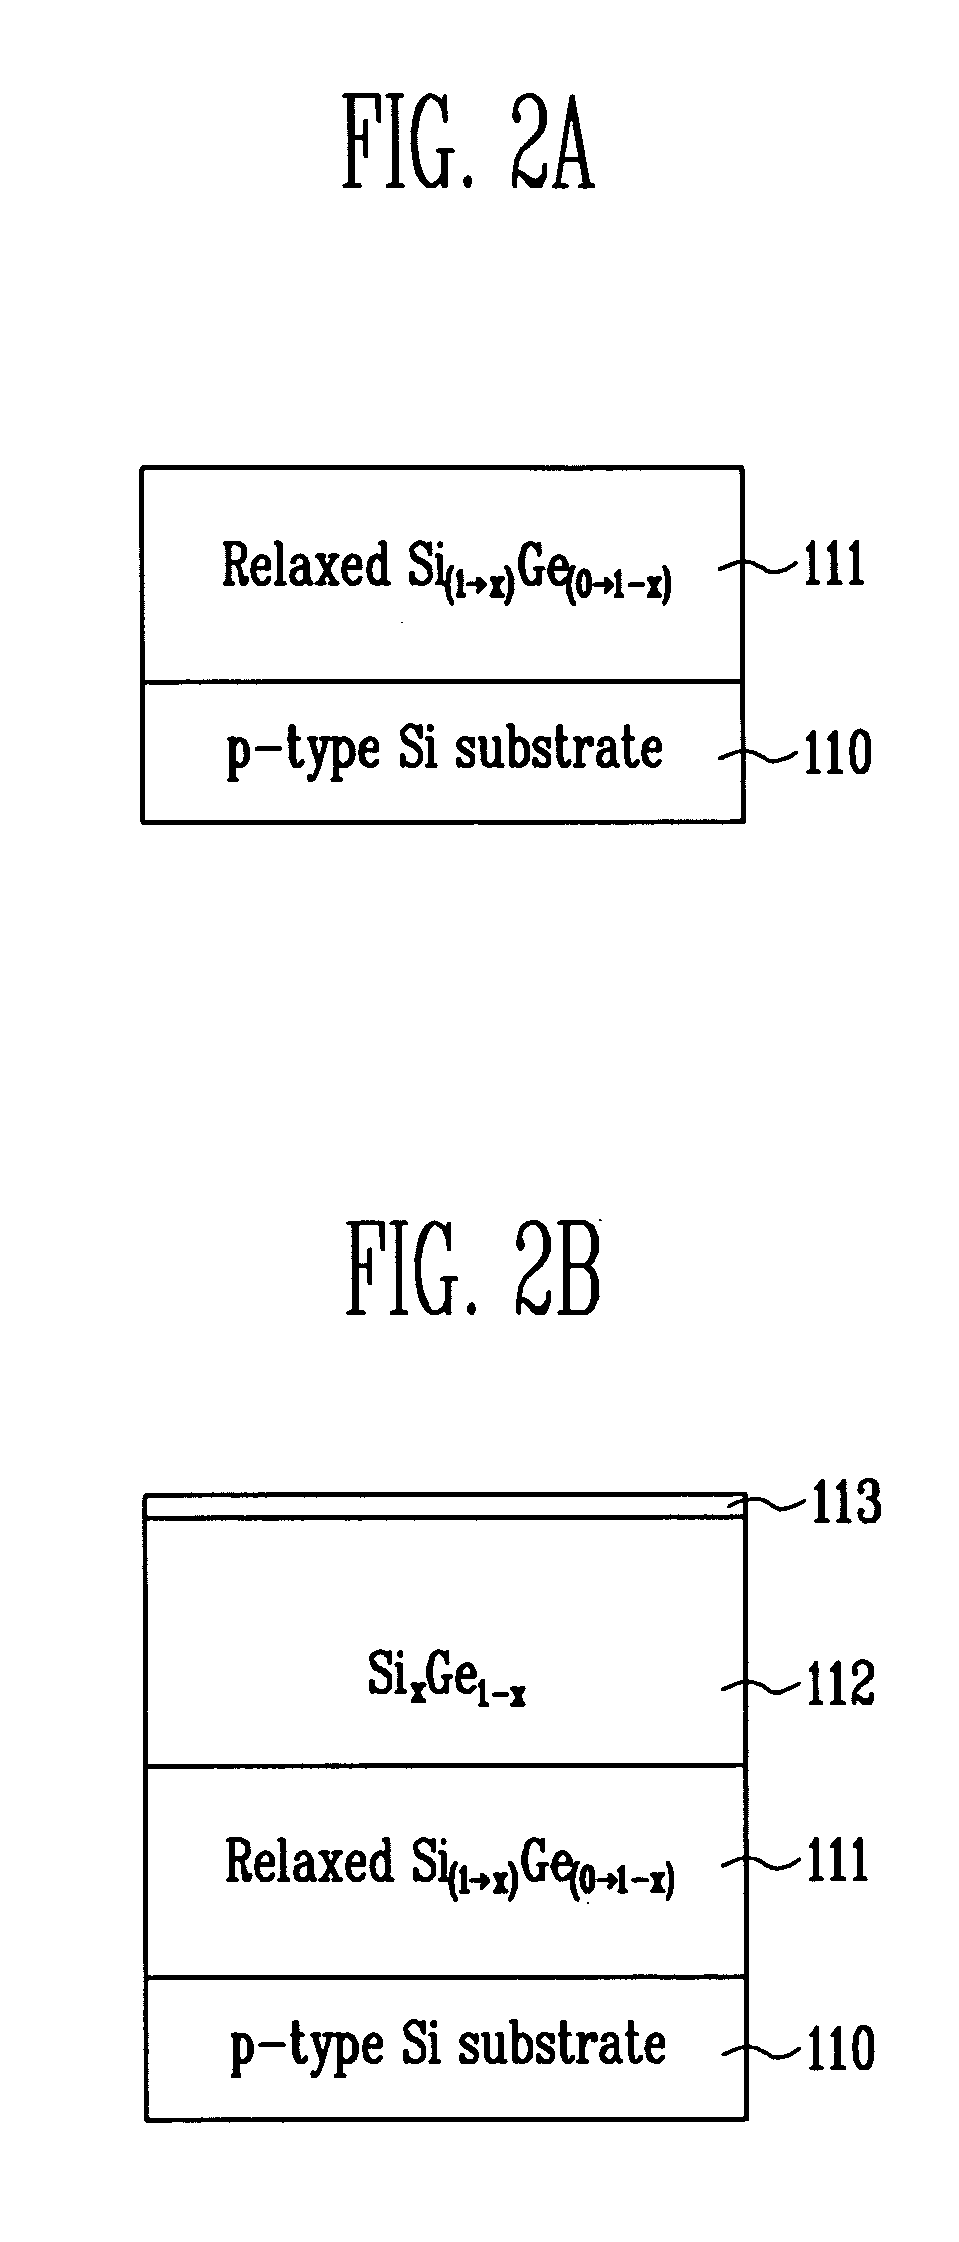 High voltage mosfet having Si/SiGe heterojunction structure and method of manufacturing the same